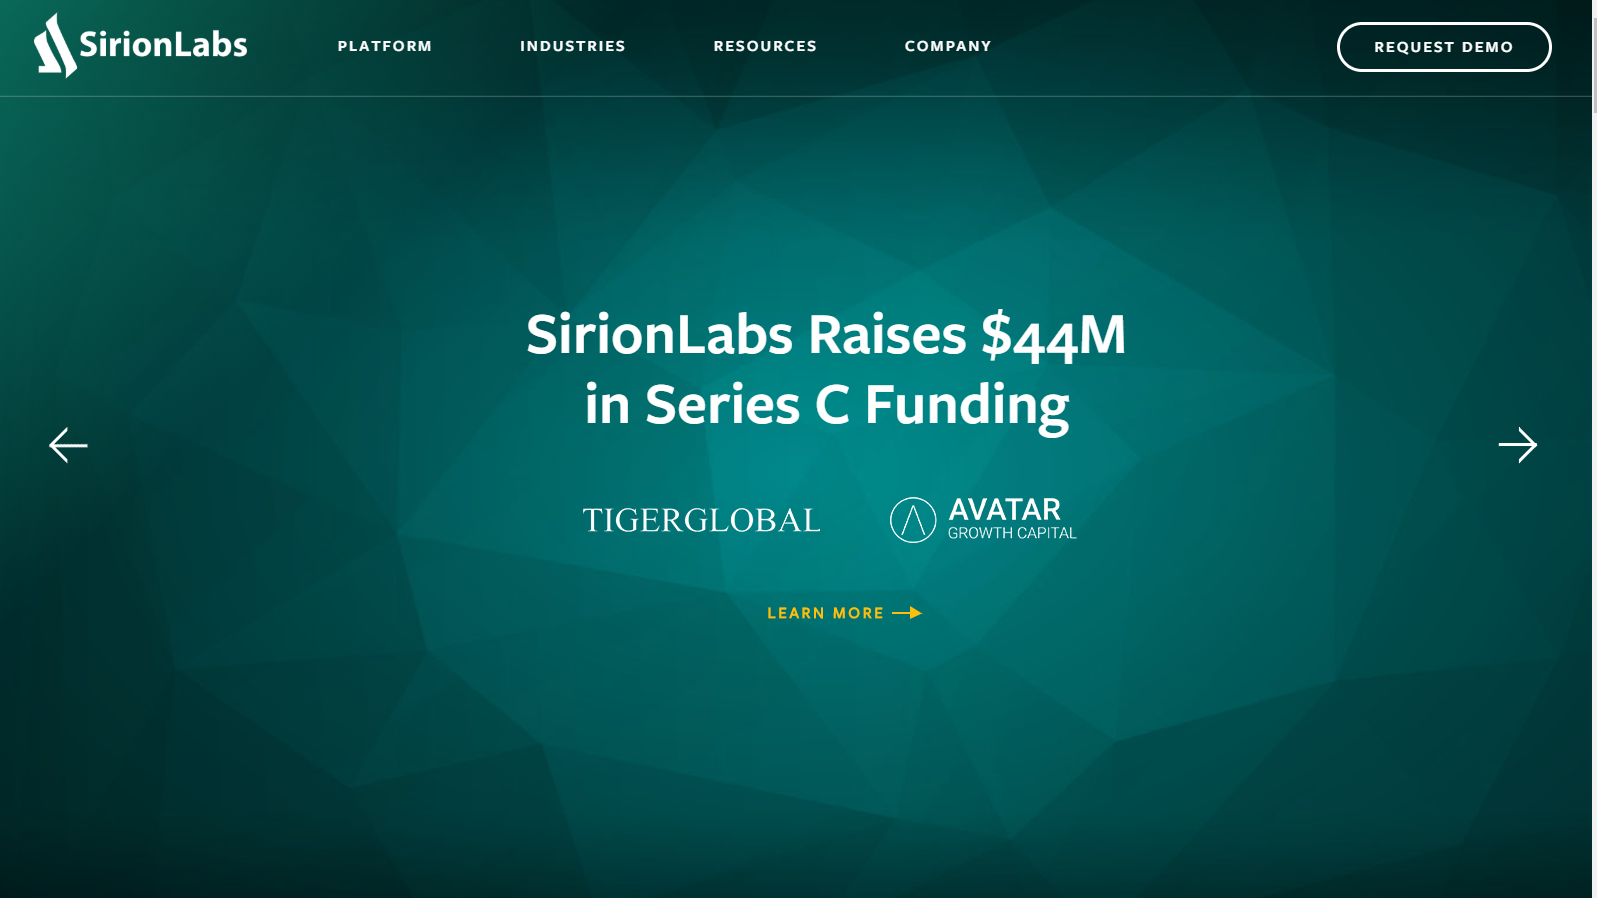 Contract Management Company SirionLabs Raises $44M to Further Develop Its AI Platform